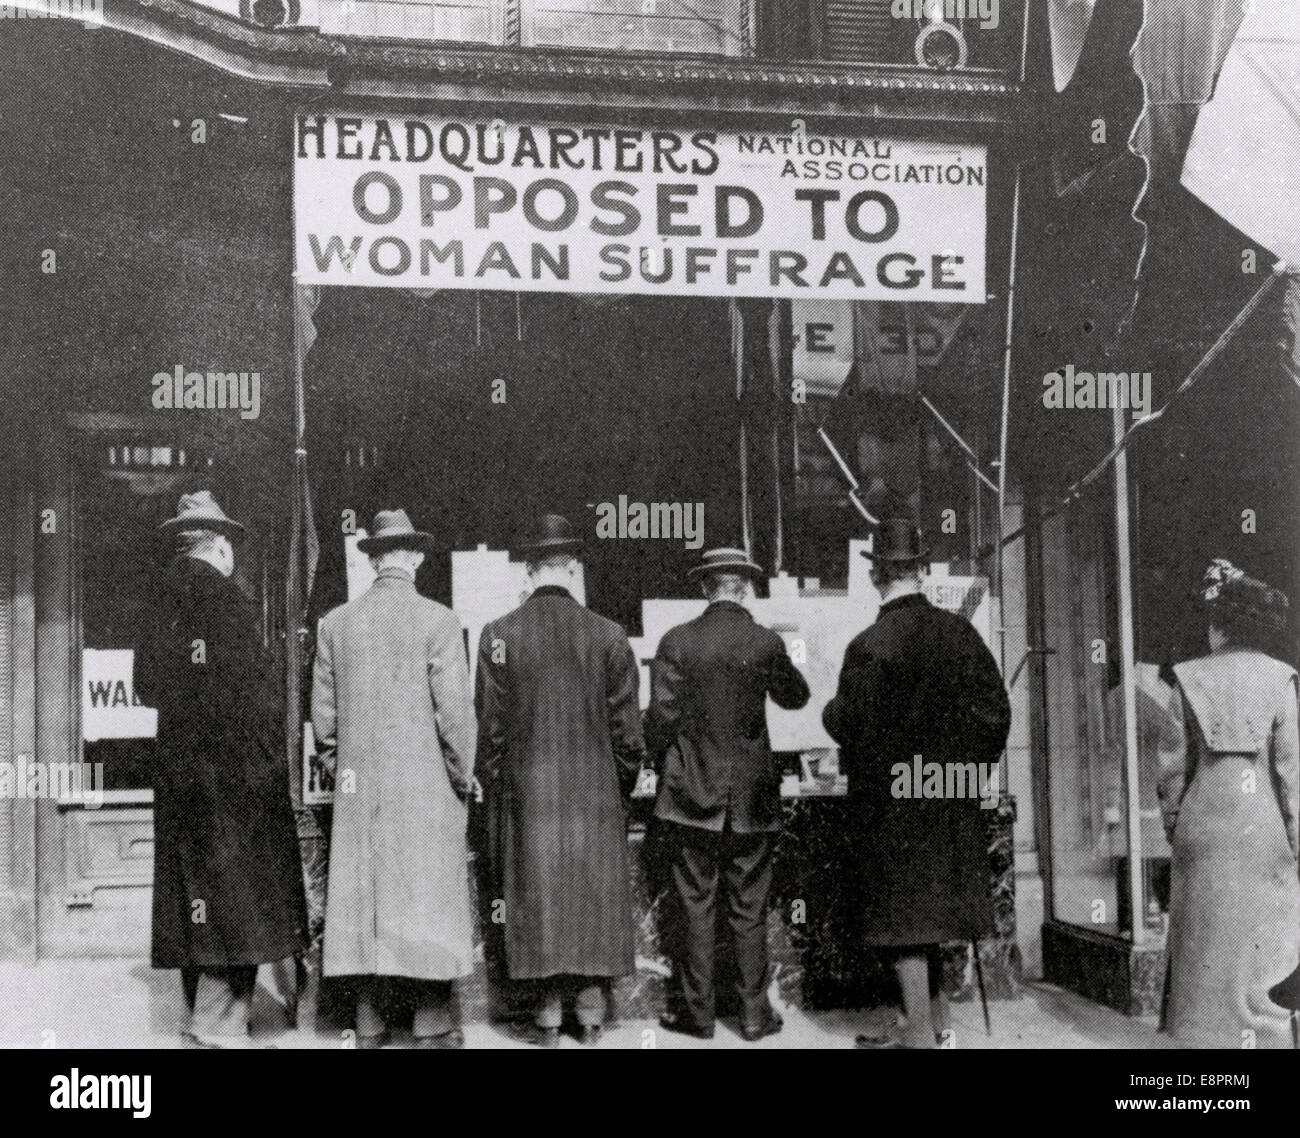 Passers-By Looking at Window Display at the Headquarters of National Association Opposed to Woman Suffrage, ca. 1919 Stock Photo